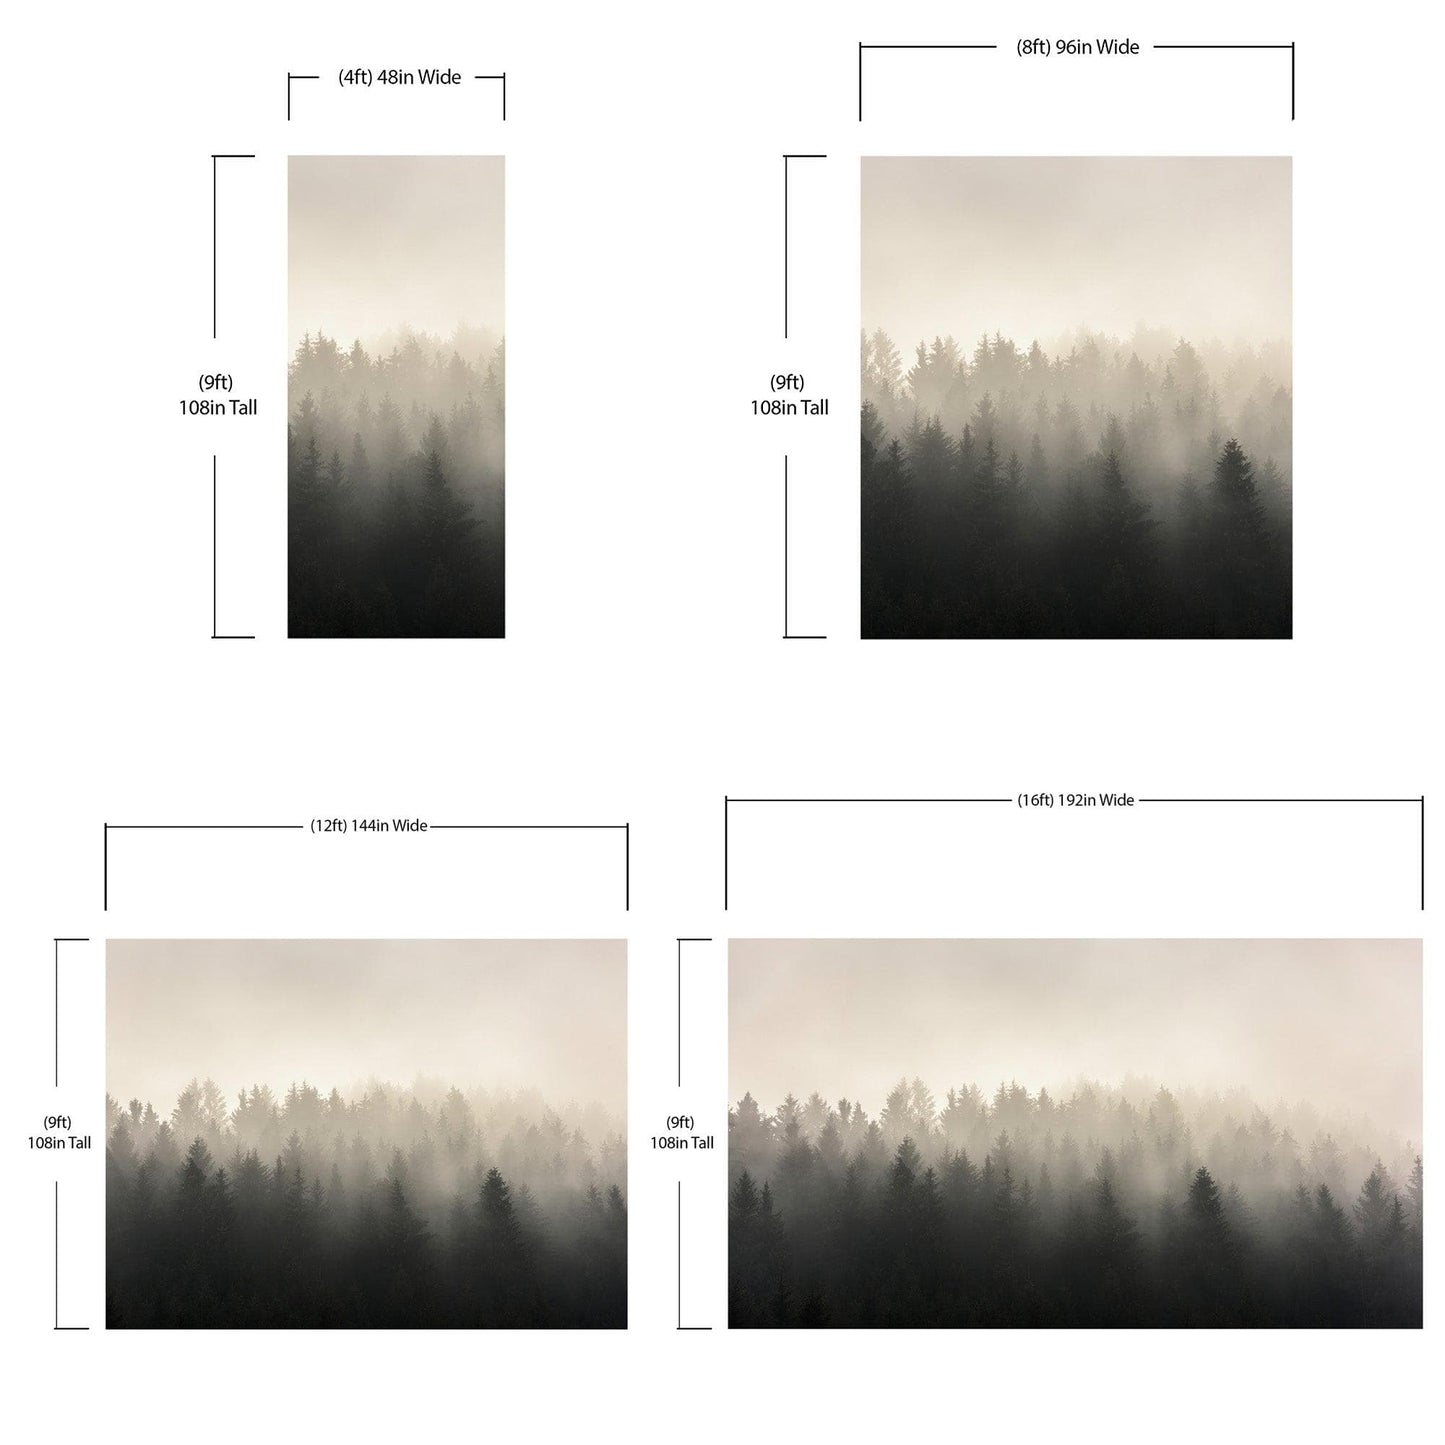 Misty Pine Forest Wall Mural. Peaceful Foggy Morning Scenery. #6122